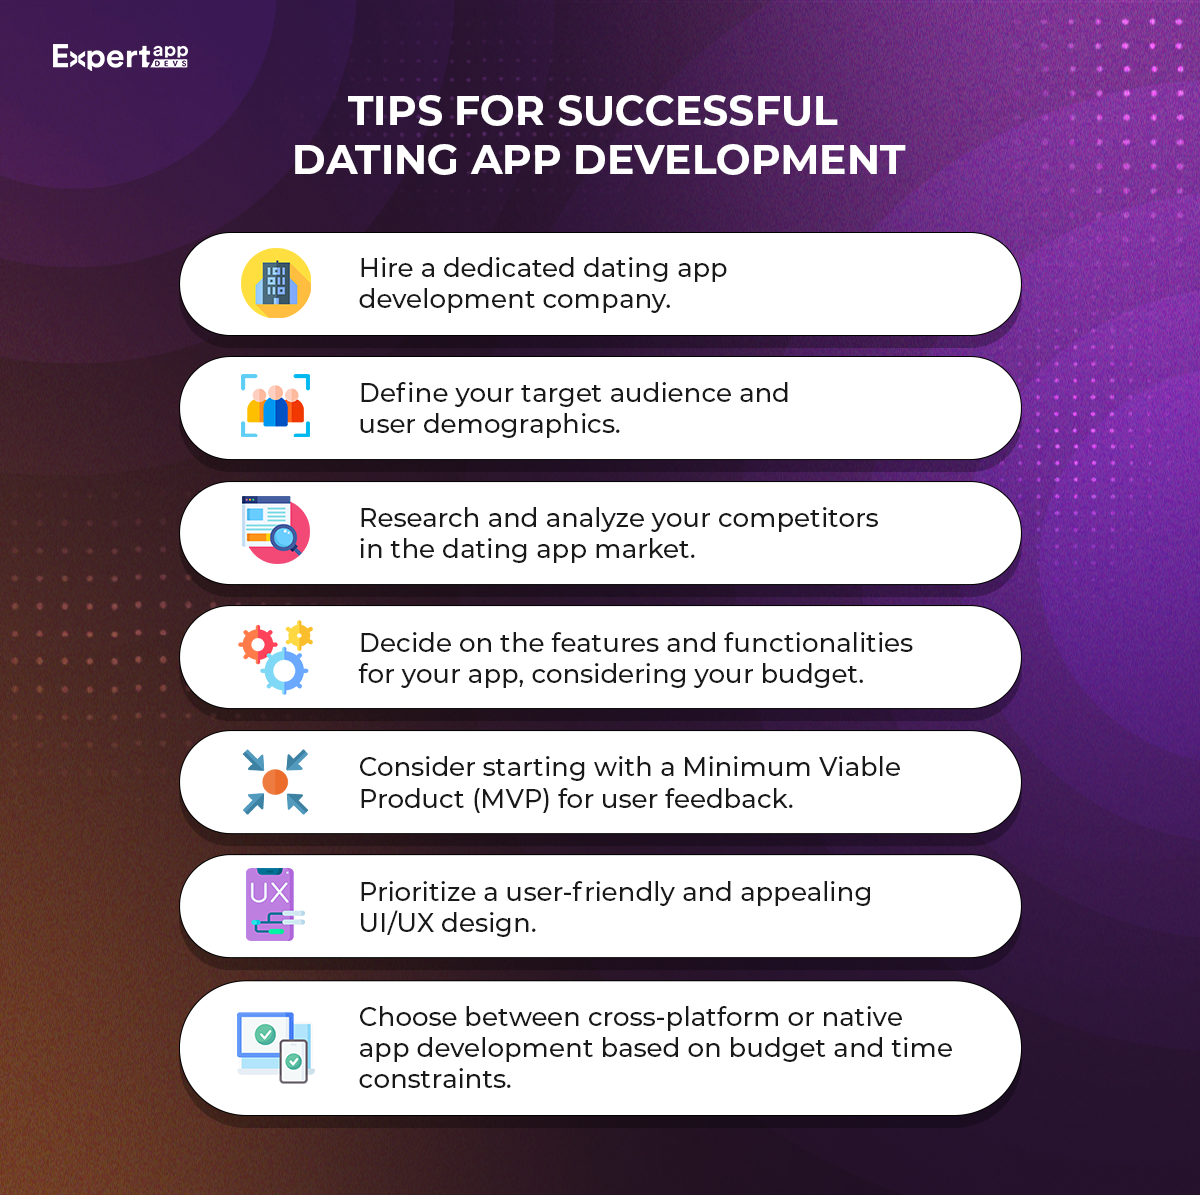 Tips for Successful Dating App Development